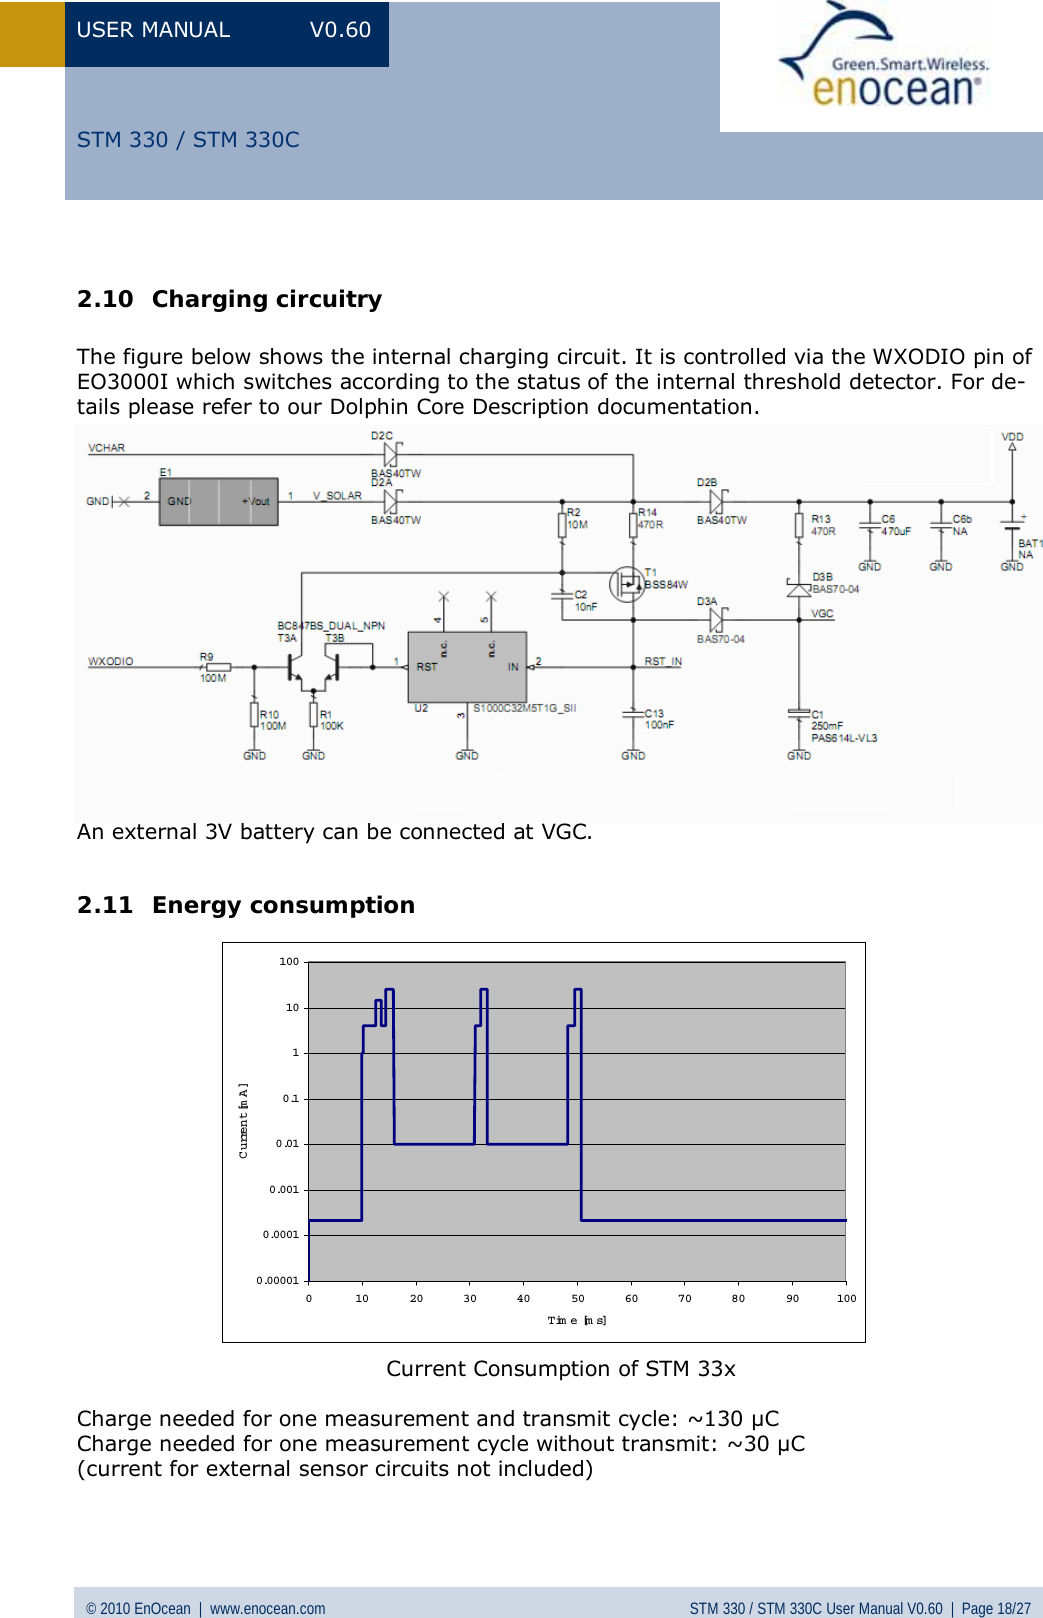 USER MANUAL V0.60 © 2010 EnOcean  |  www.enocean.com STM 330 / STM 330C User Manual V0.60  |  Page 18/27  STM 330 / STM 330C 2.10 Charging circuitry  The figure below shows the internal charging circuit. It is controlled via the WXODIO pin of EO3000I which switches according to the status of the internal threshold detector. For de-tails please refer to our Dolphin Core Description documentation.                 An external 3V battery can be connected at VGC.  2.11 Energy consumption           Current Consumption of STM 33x  Charge needed for one measurement and transmit cycle: ~130 µC  Charge needed for one measurement cycle without transmit: ~30 µC (current for external sensor circuits not included)  0.000010.00010.0010.010.11101000 102030405060708090100Time [ms]C u rre n t [mA]